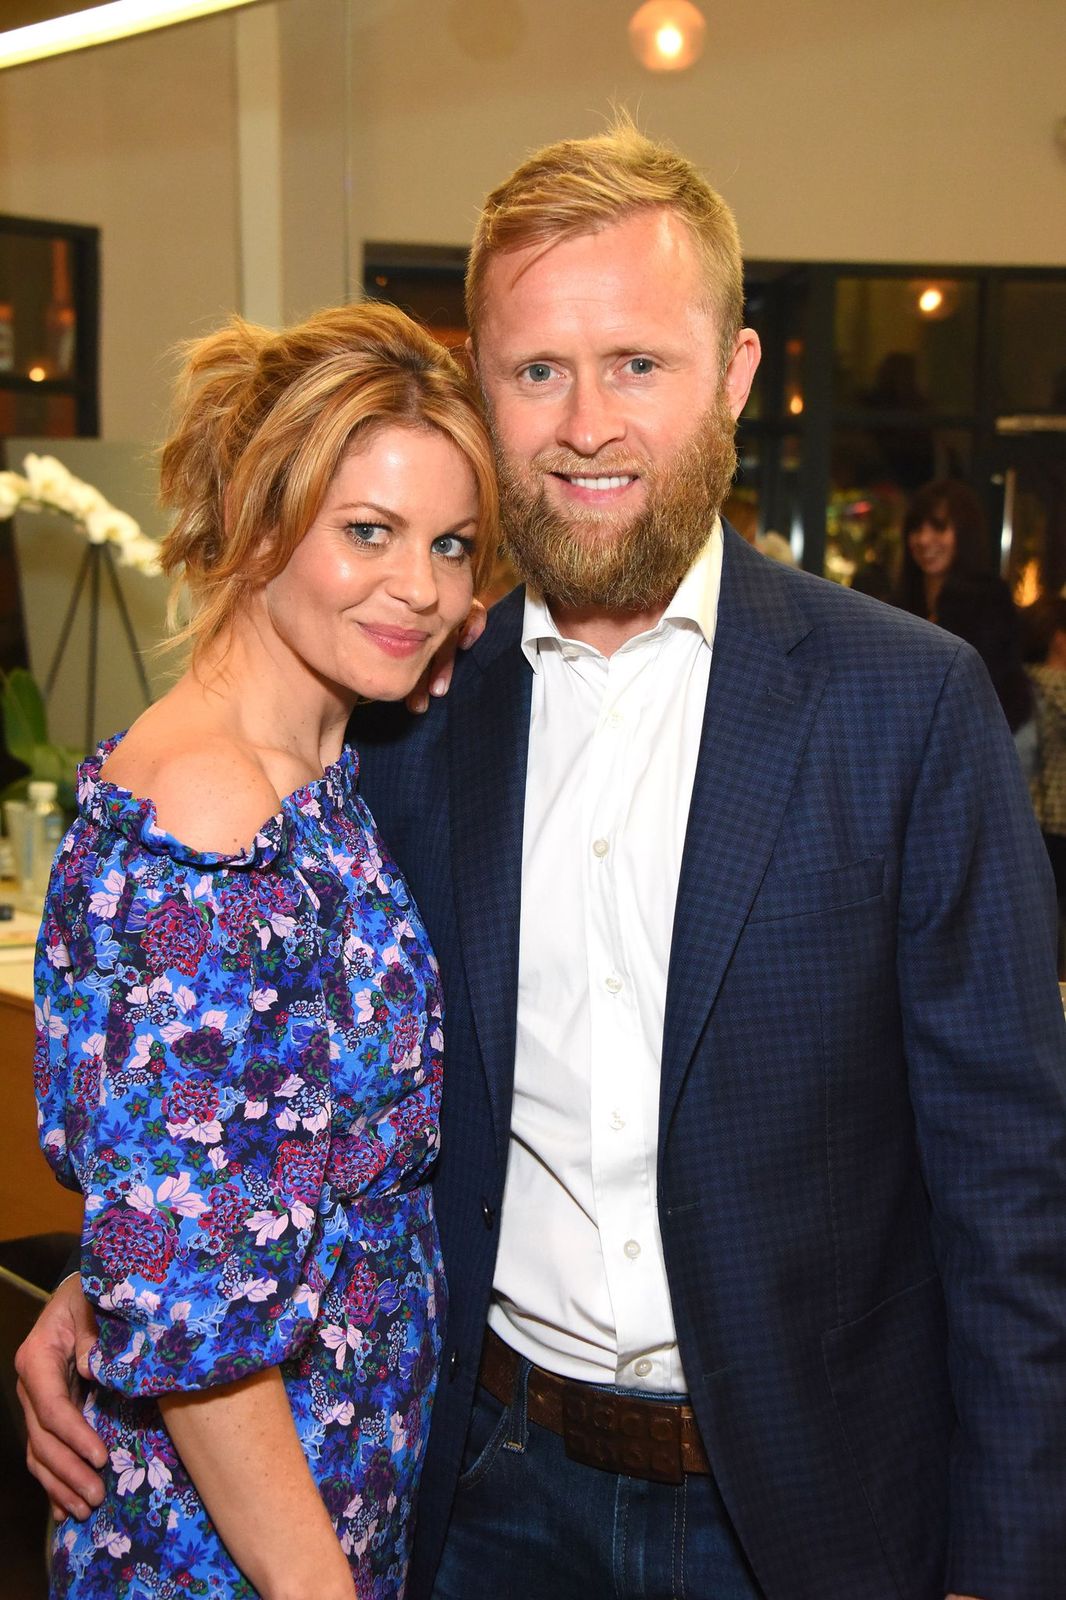 Candace Cameron and Valeri Bure at Natasha Bure's "Let's Be Real" Los Angeles book launch party on March 24, 2017, in Los Angeles, California | Photo: Araya Diaz/Getty Images